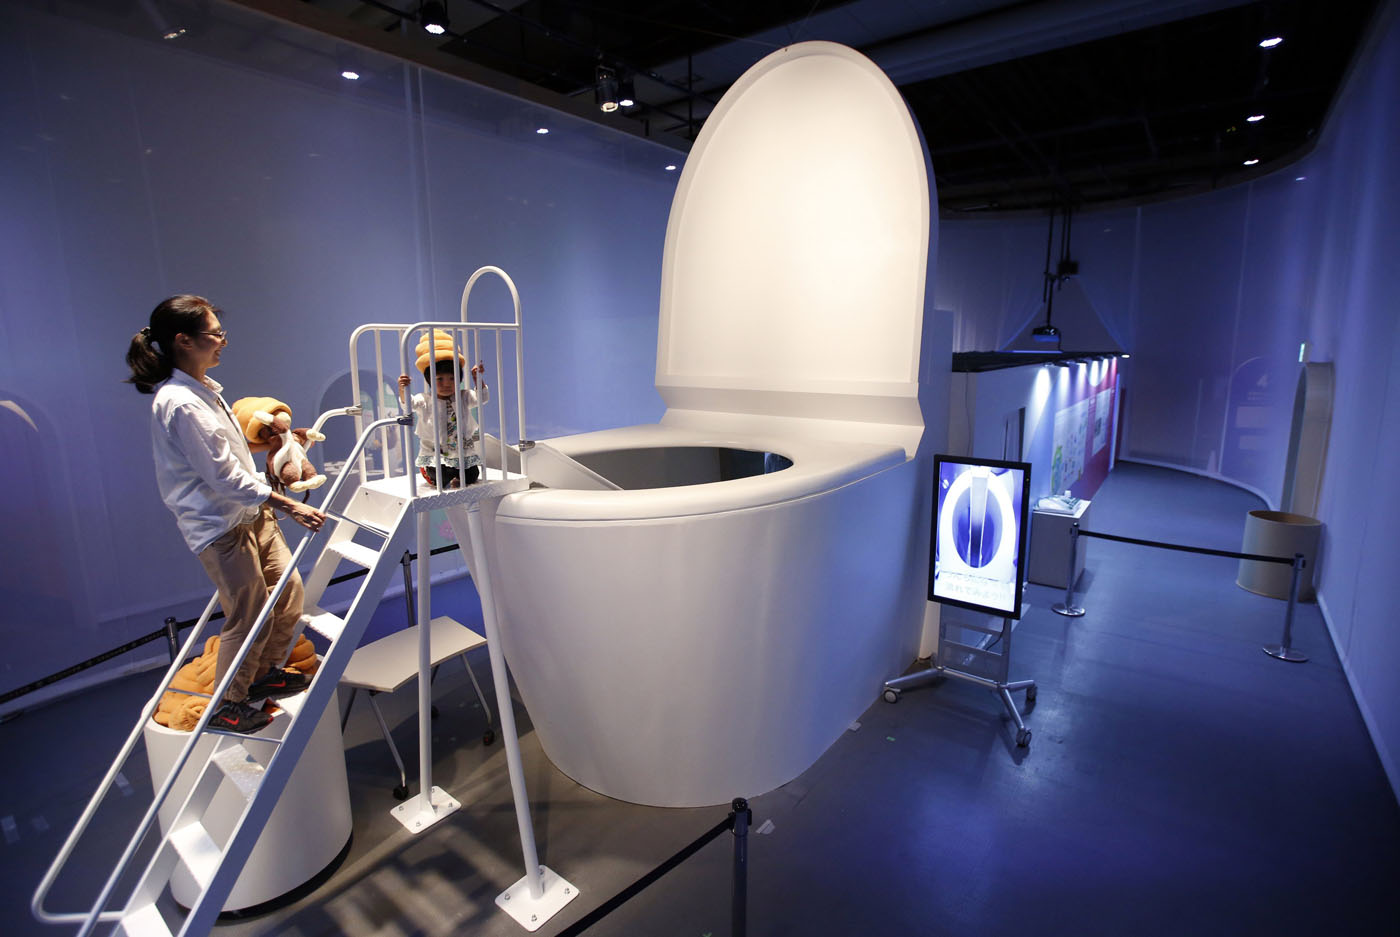 A girl wearing a feces-shaped hat prepares to slide down into a 16-foot toilet at an exhibition entitled, “Toilet!”.